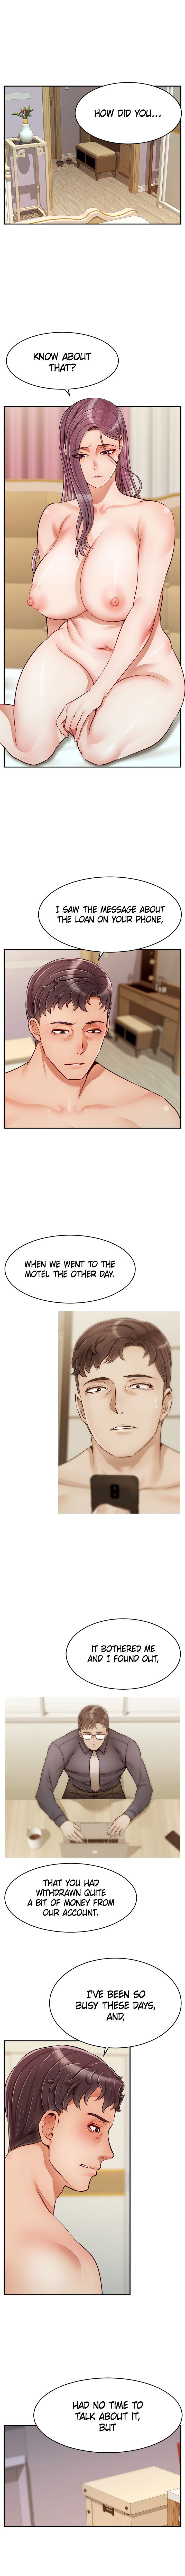 its-okay-because-were-family-chap-35-0